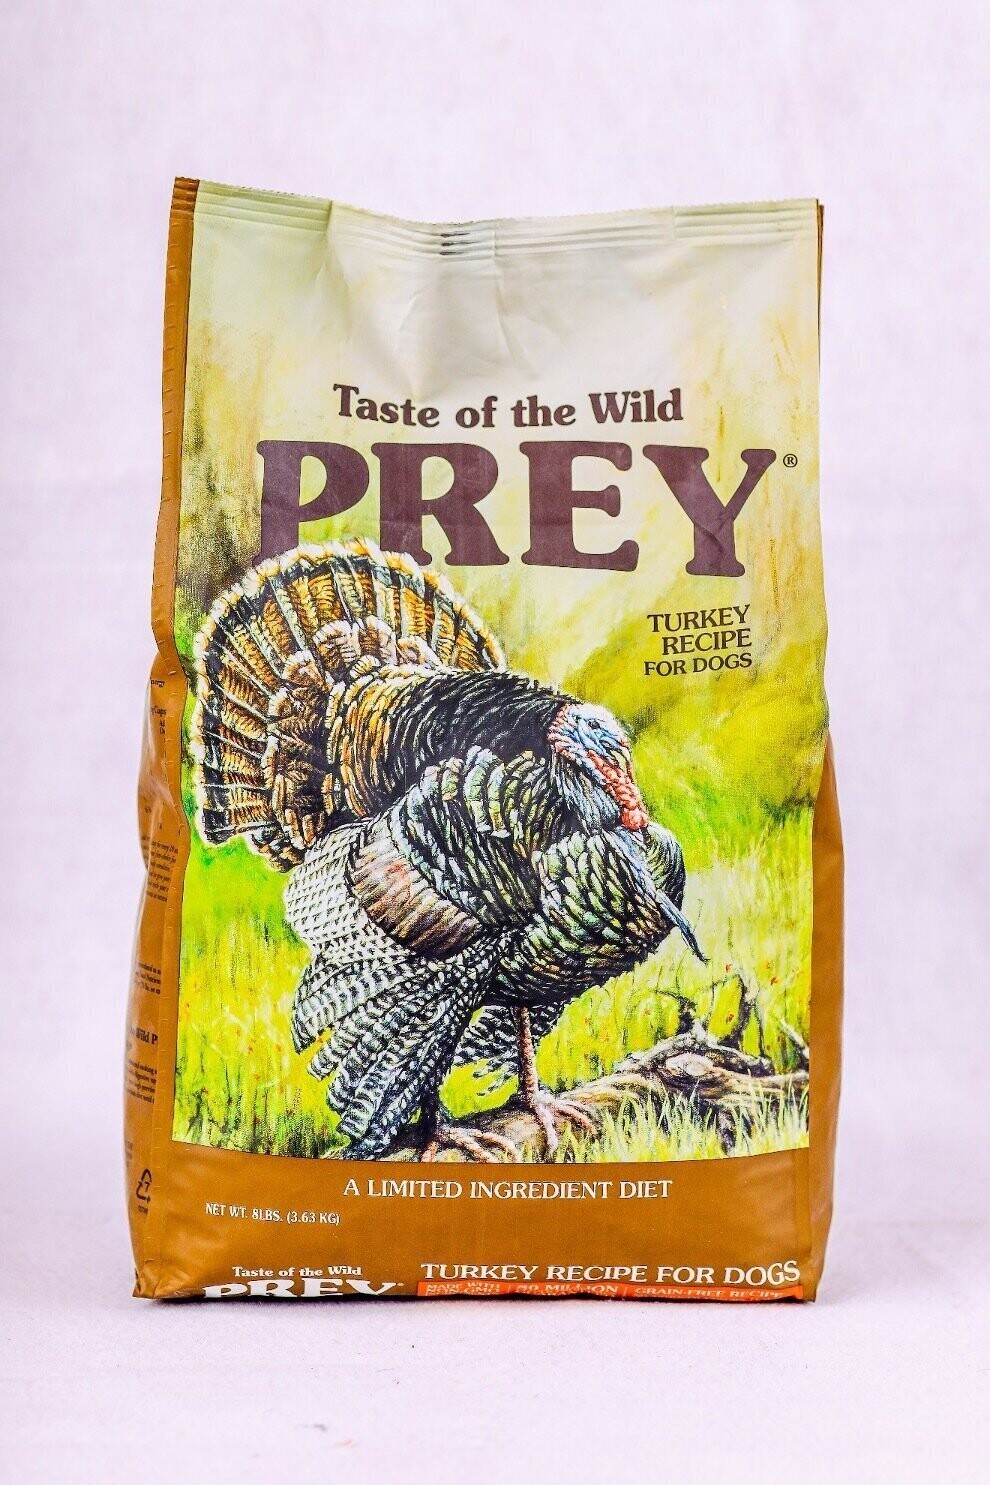 Where to Buy Taste of the Wild Limited Ingredient Turkey